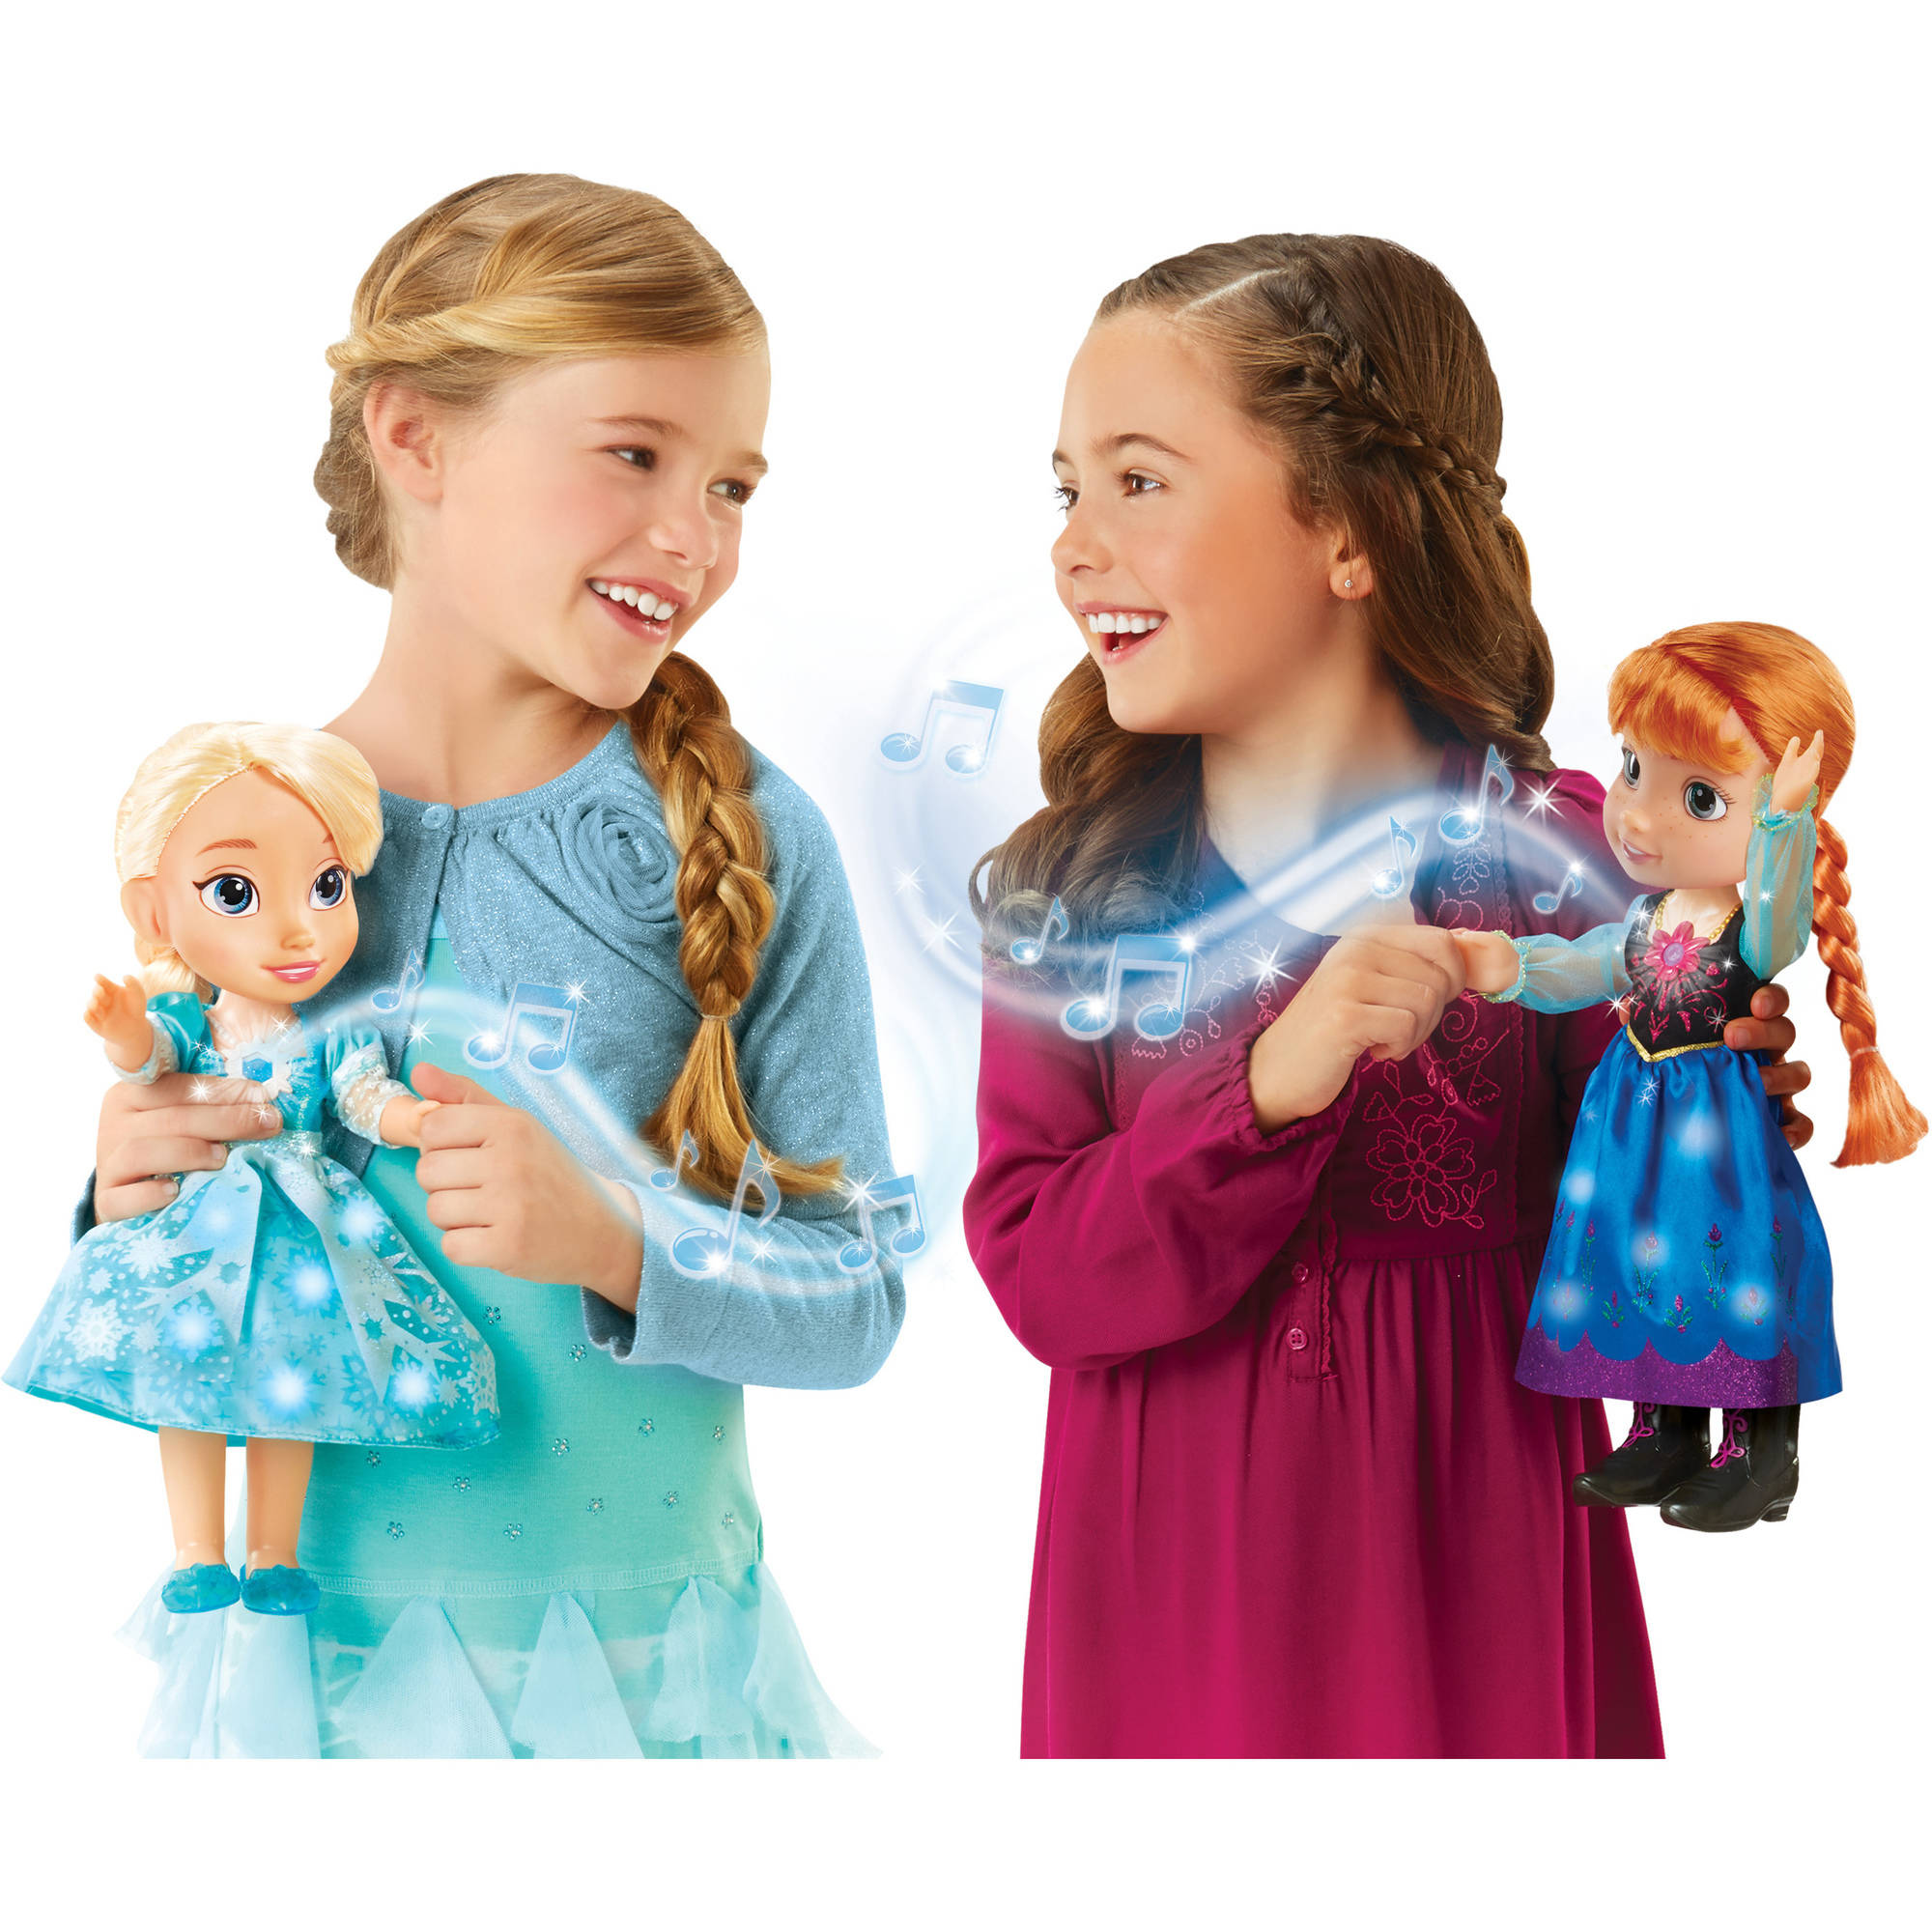 Disney Frozen Singing Sisters Elsa and Anna Dolls (Exclusive) - image 2 of 3